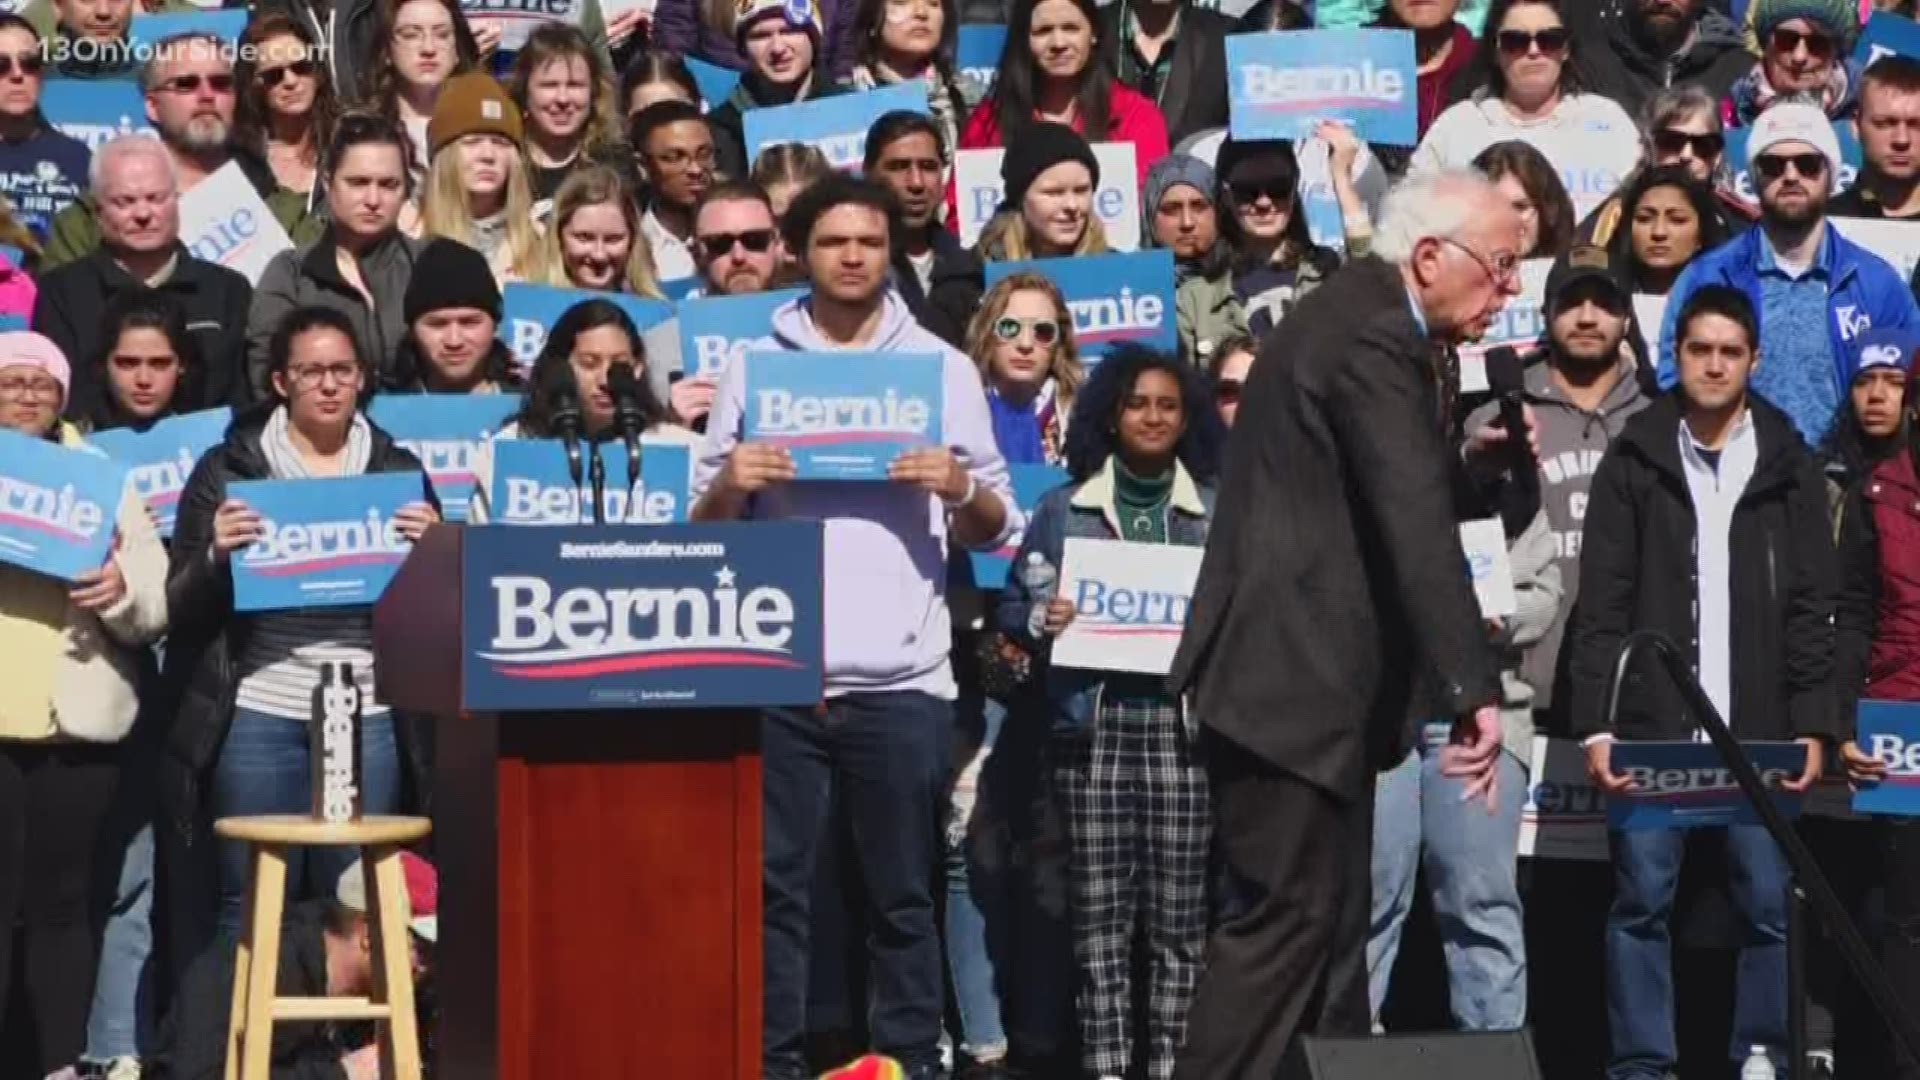 Sunday's rally in Grand Rapids was one of four Sen. Bernie Sanders is holding in Michigan in the days leading up to the primary.